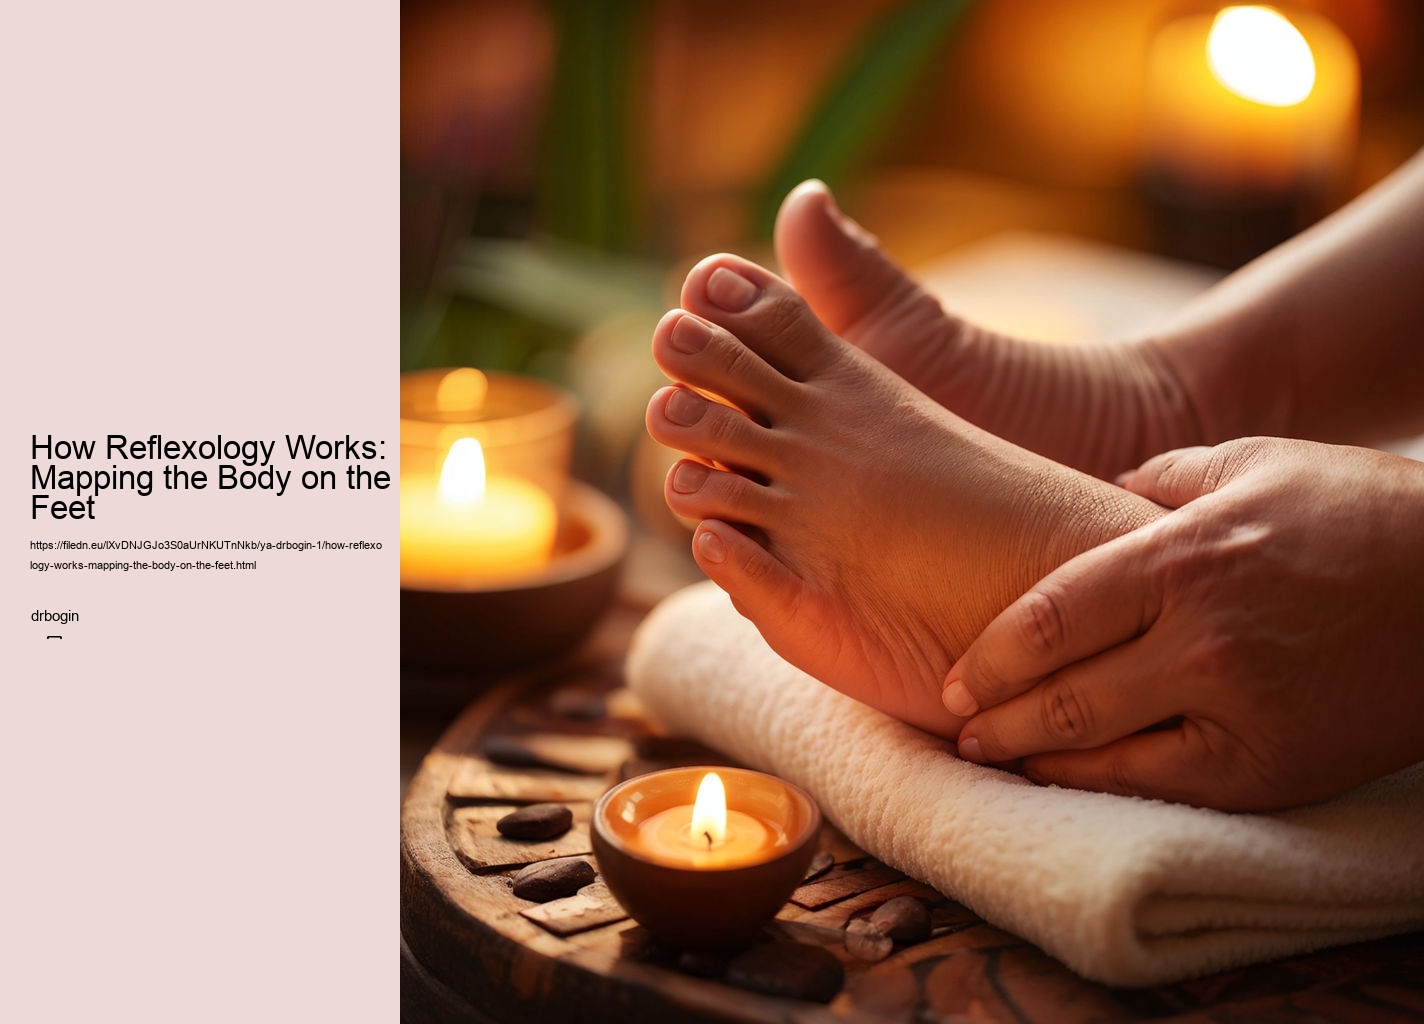 How Reflexology Works: Mapping the Body on the Feet